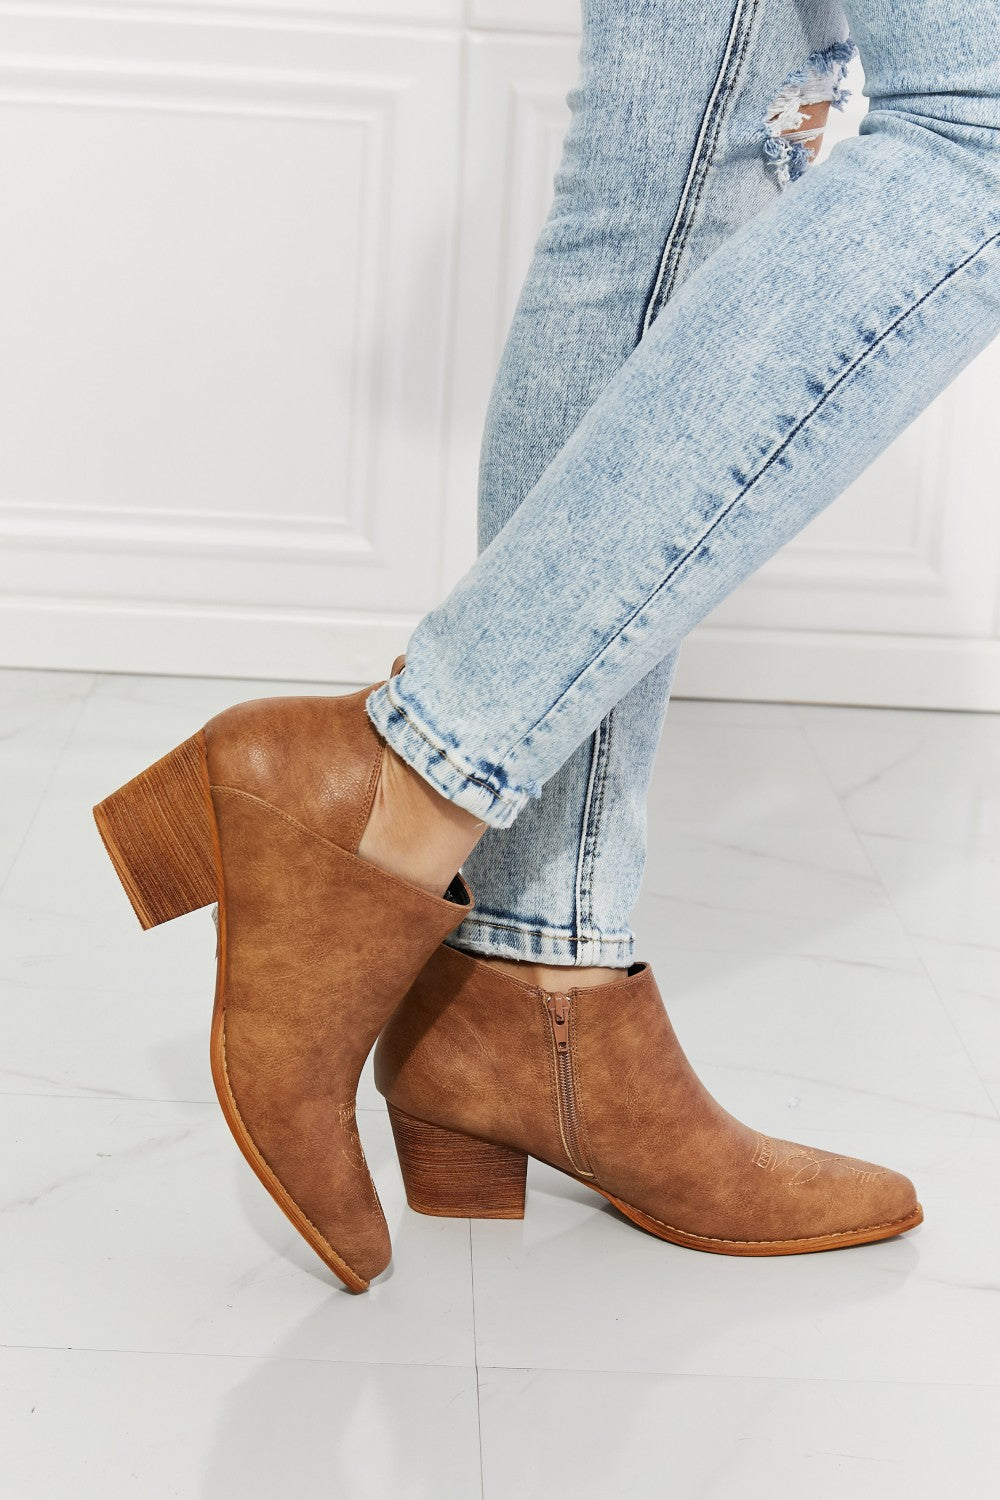 Trusty3 - Embroidered Crossover Cowboy Bootie in Caramel